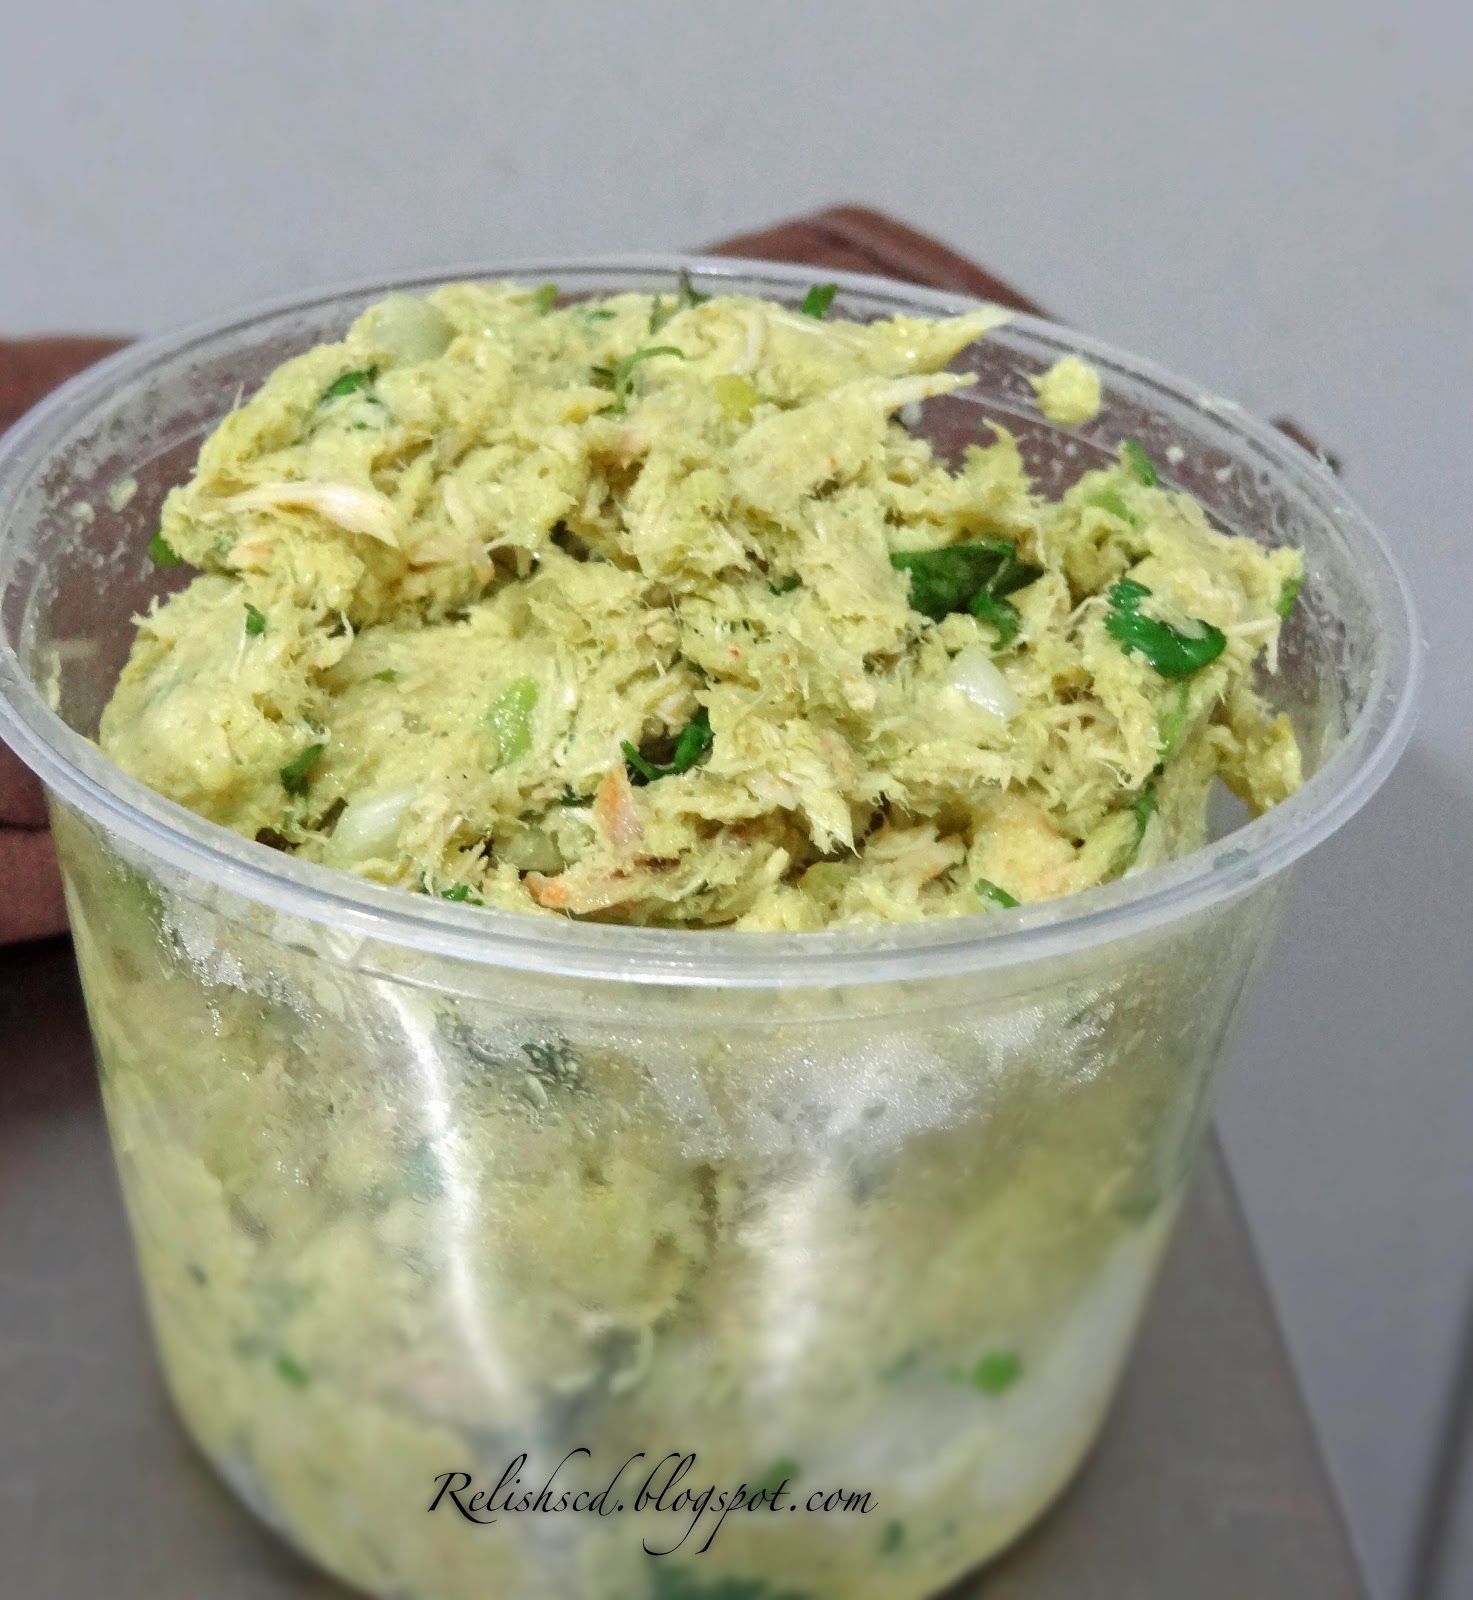 Avocado Chicken salad: shredded chicken, lime juice, chopped onion, s/p, & a little cilantro! Yummy and another way to get in